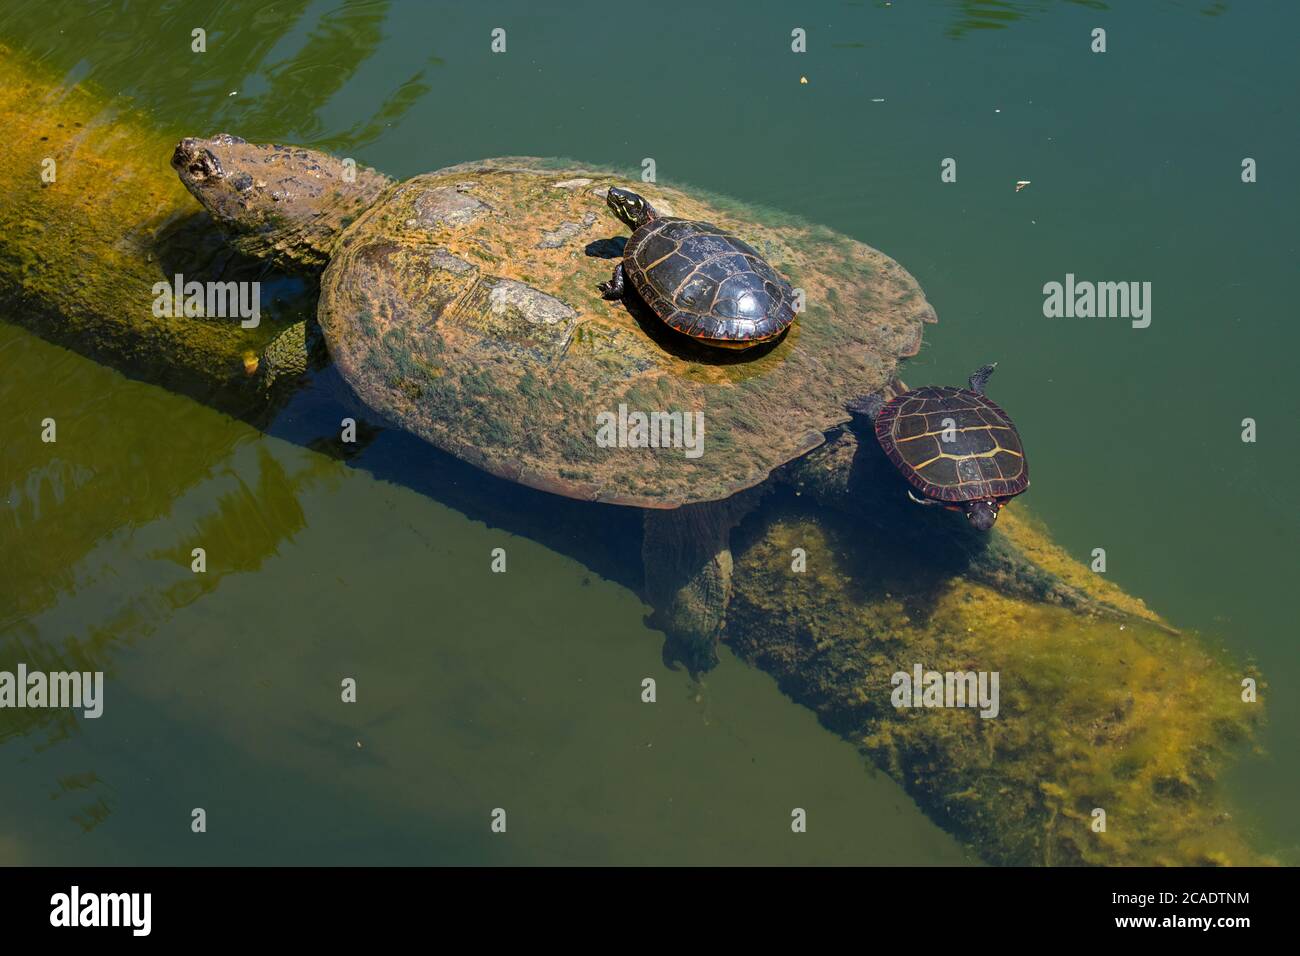 Snapping turtle, Chelydra serpentina, and painted turtles, Chrysemys picta, basking, Maryland Stock Photo